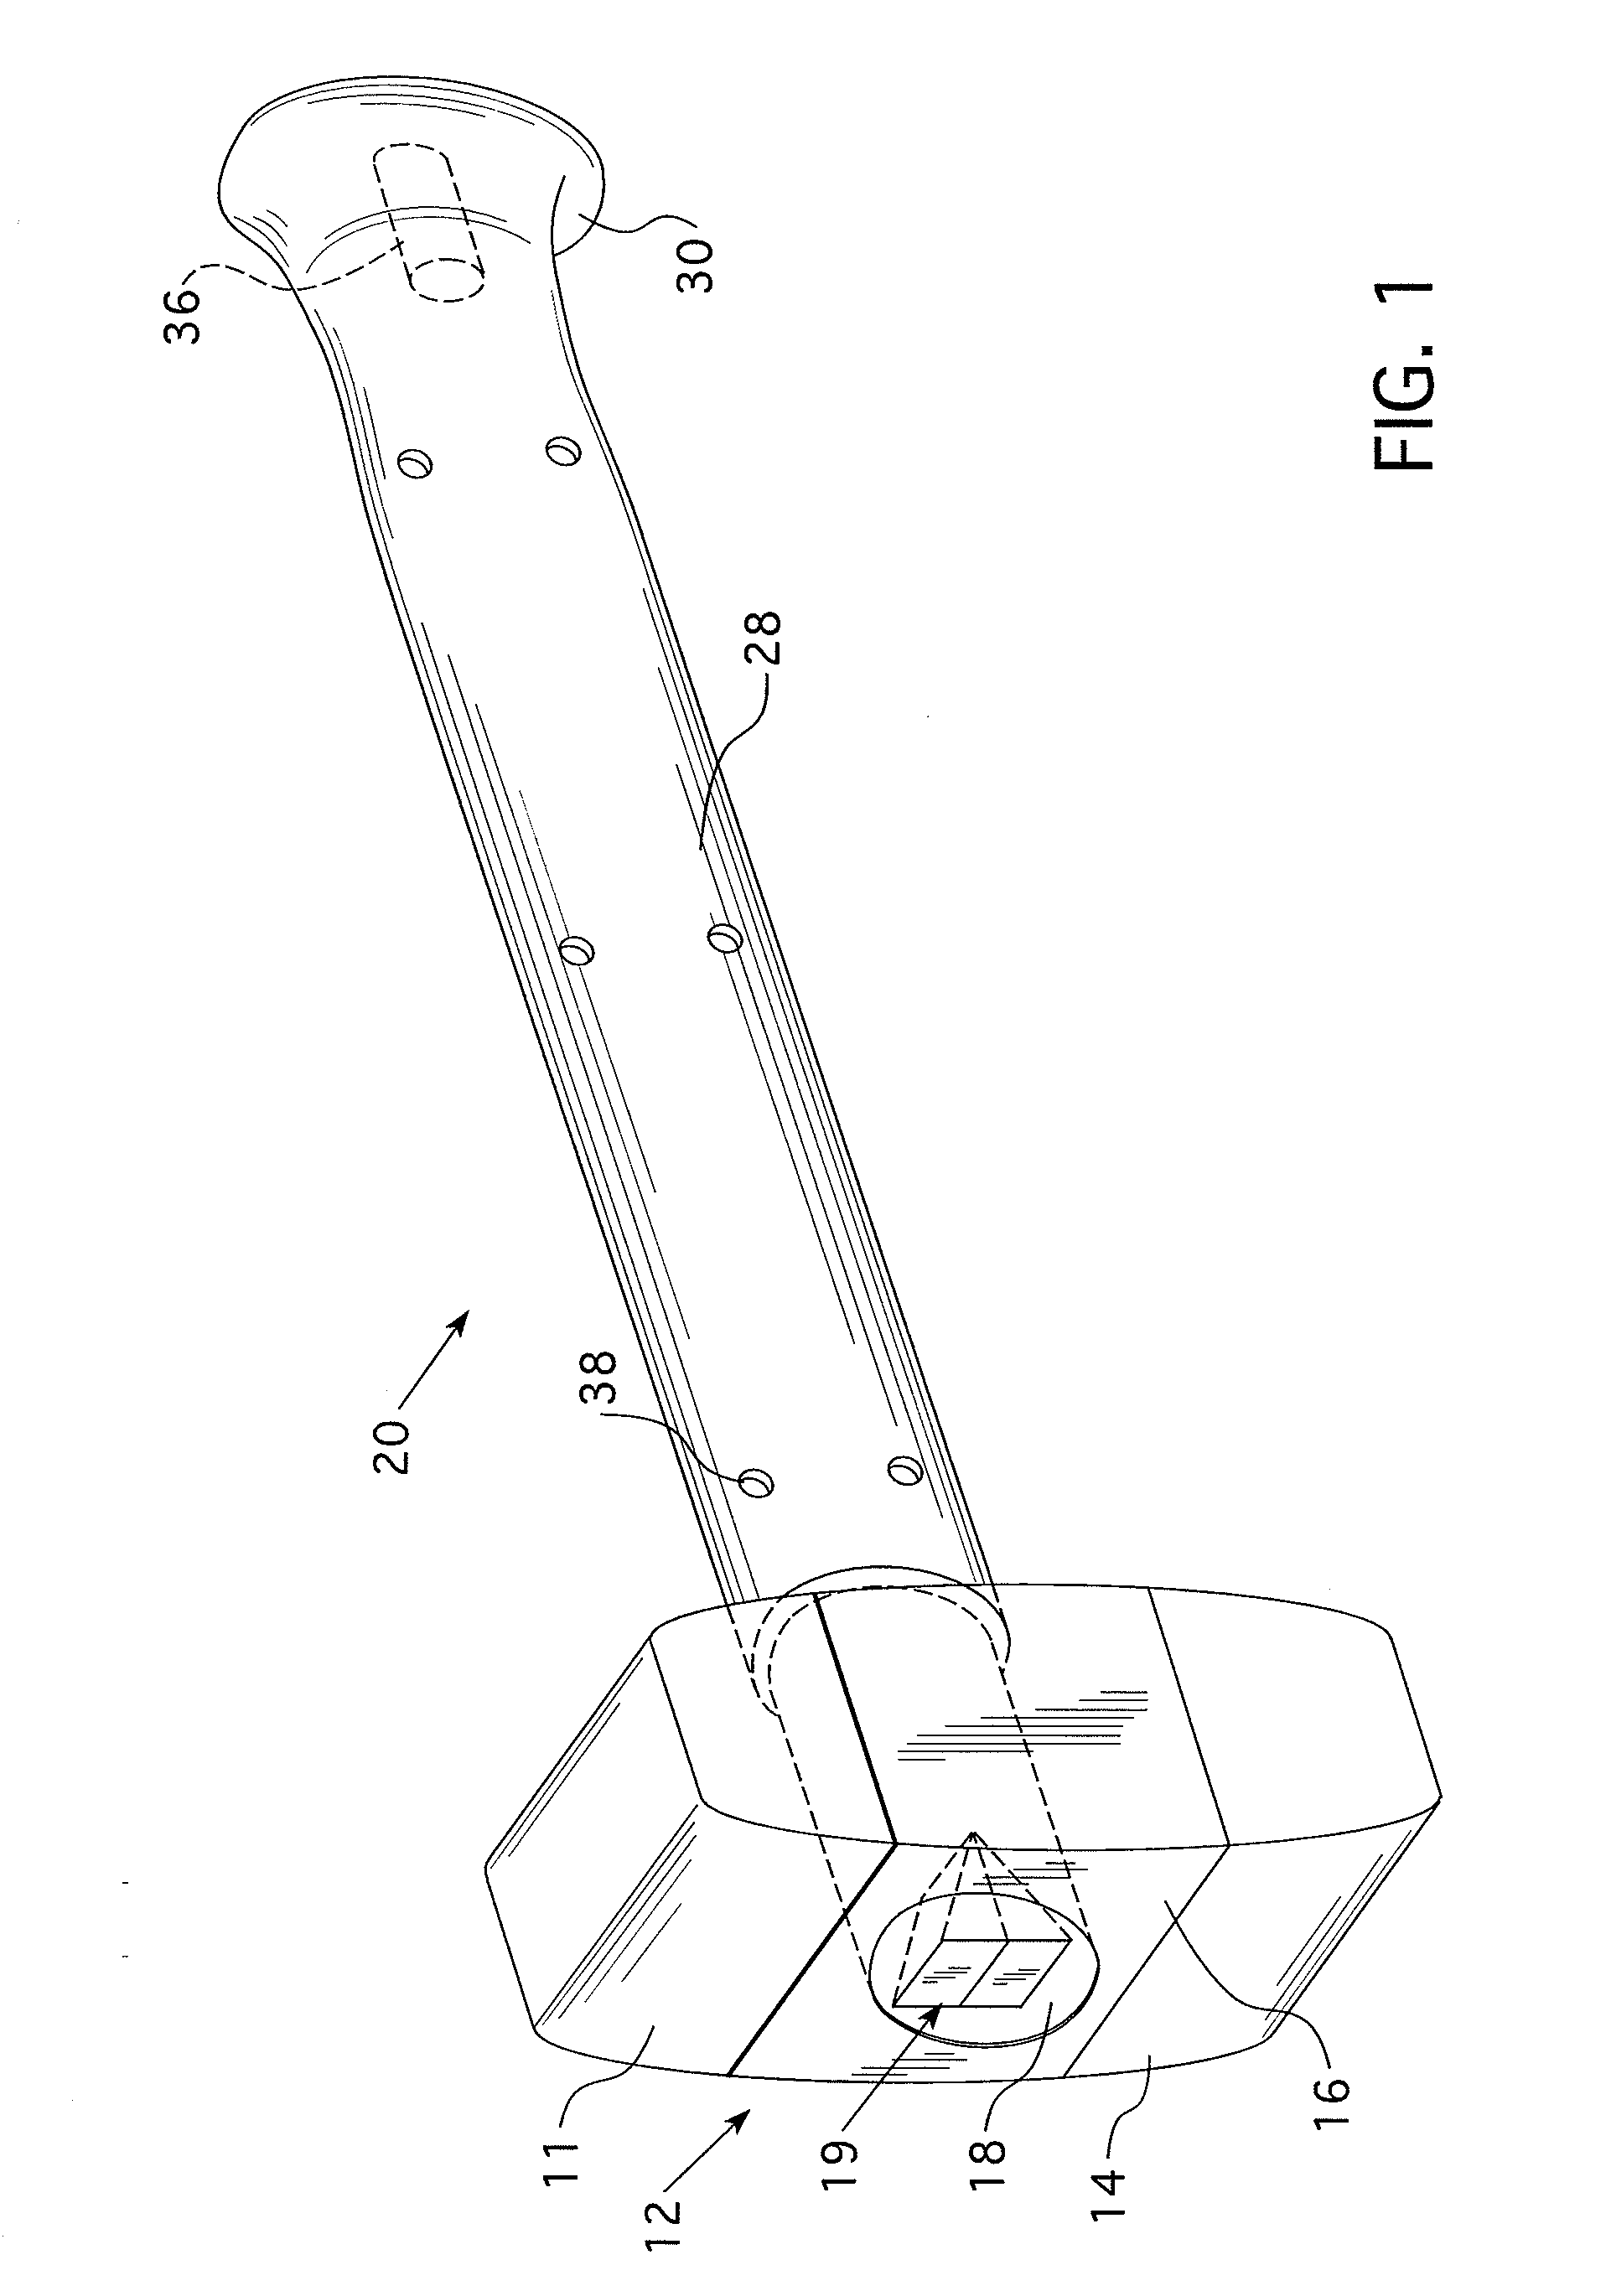 Wood handle with overmold and method of manufacture